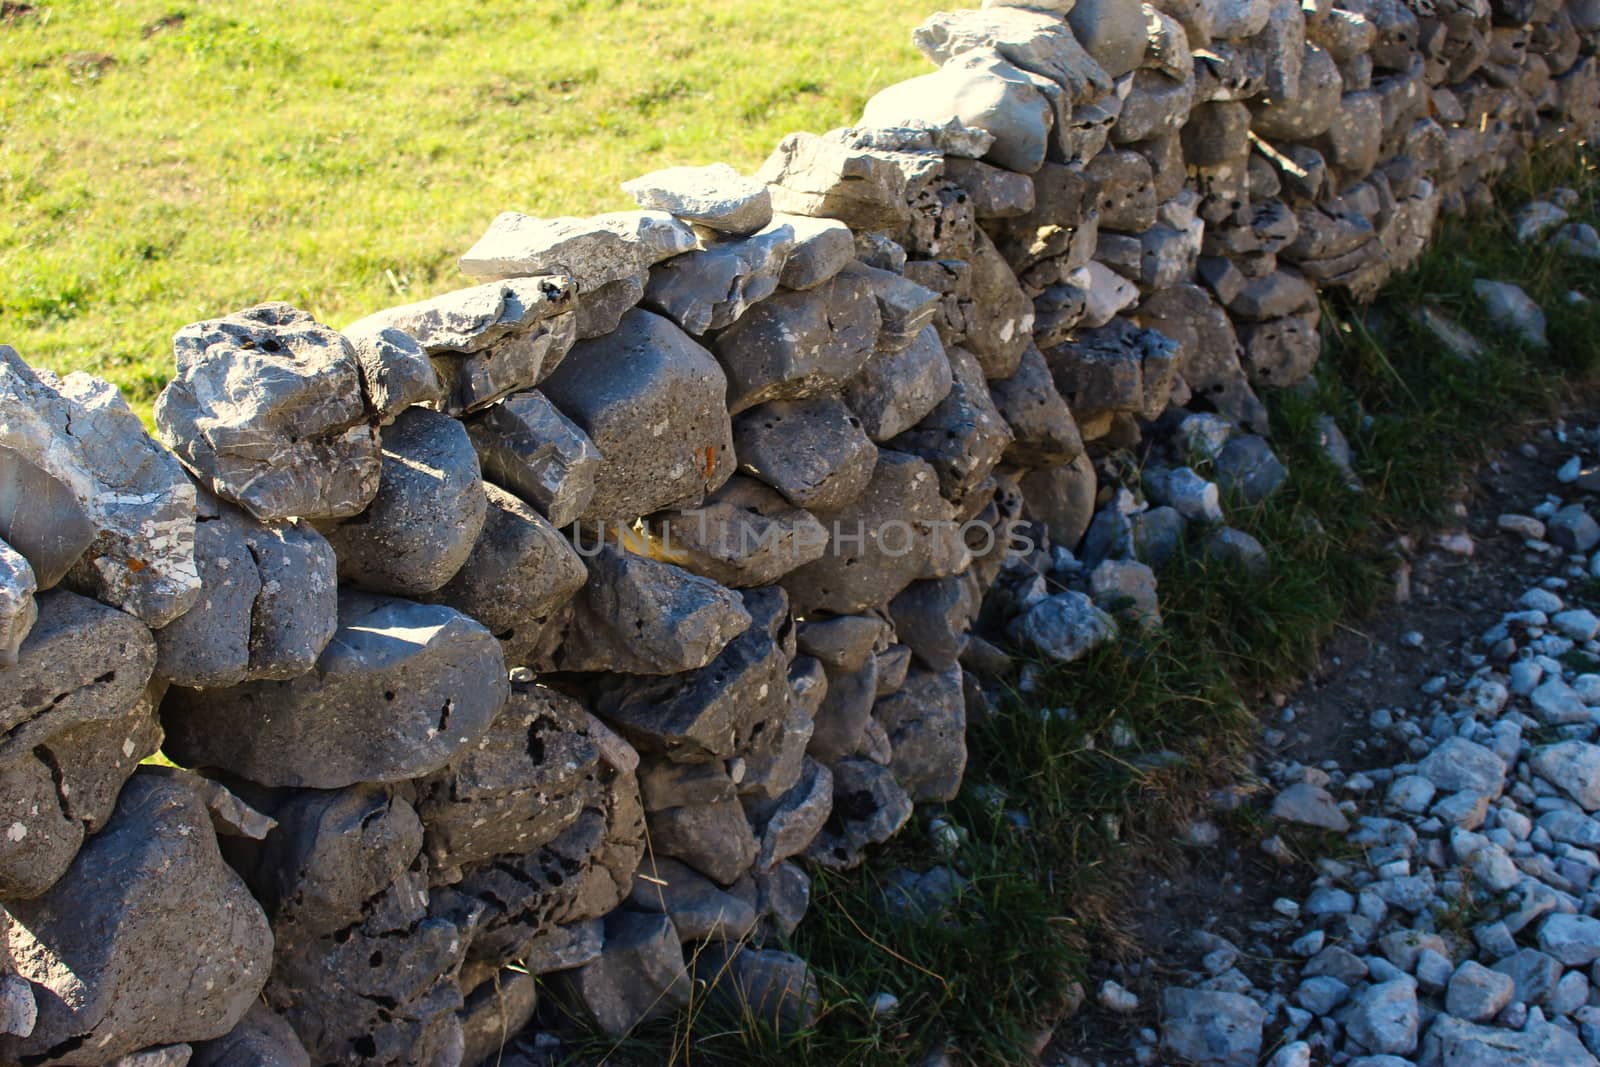 Large stones stacked in the wall to fence off the field from the road. Road to the old Bosnian village of Lukomir. Bjelasnica Mountain, Bosnia and Herzegovina.